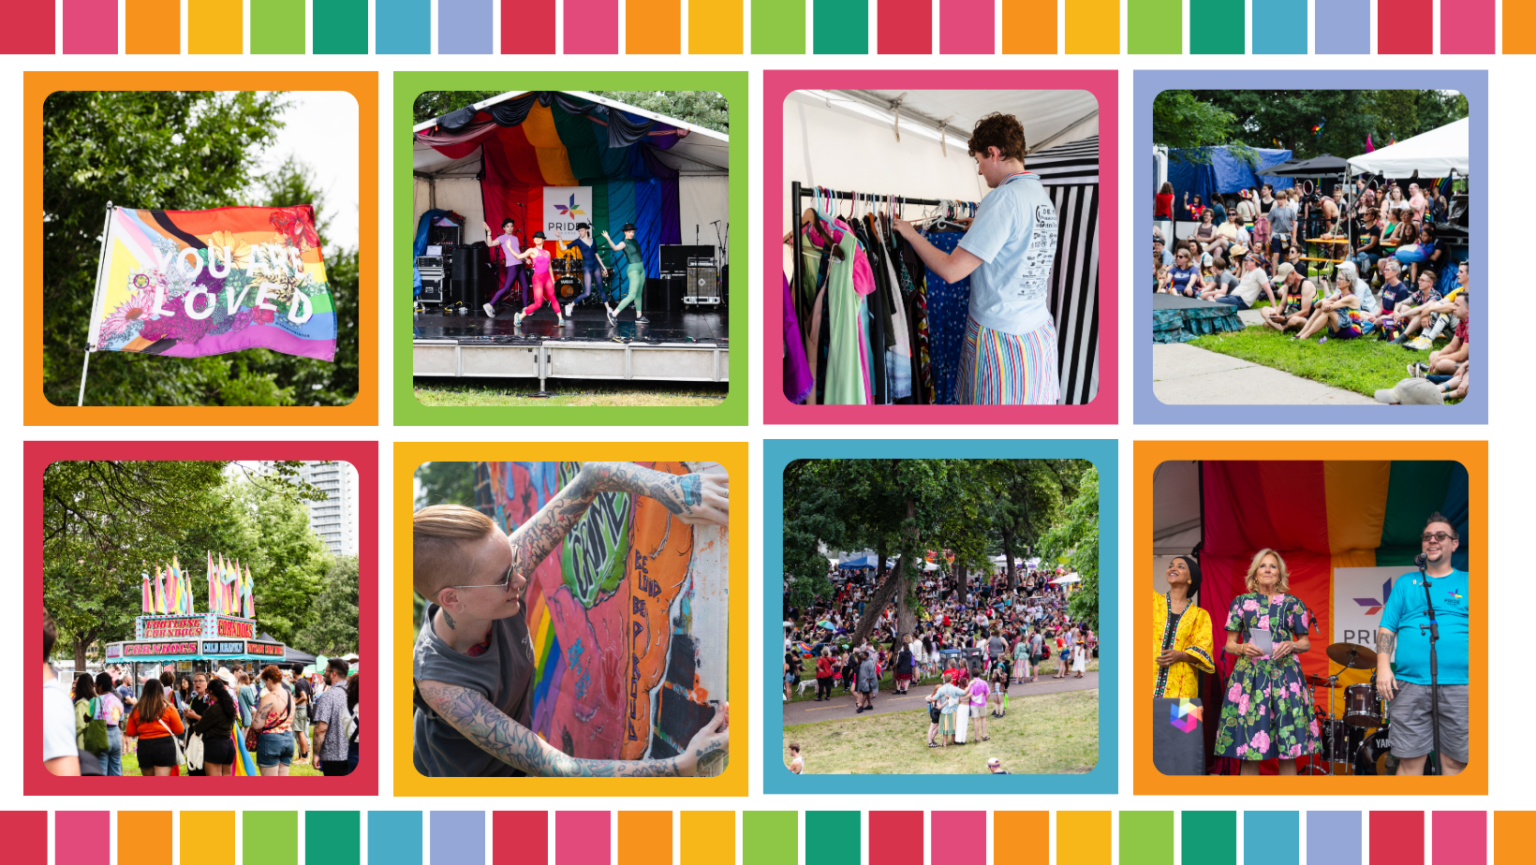 colorful grid displaying the following photos: Photo 1 - a pride flag that says "you are loved" waving in the wind. Photo 2 - A stage at Pride with 4 dancers. Photo 3 - A volunteer sorting clothing on a rack. Photo 4 - a crowd sitting in the grass in front of a stage. Photo 5 - a crowd in the park with a food vendor in the background. Photo 6 - artist Nell Tryst setting up their mural. Photo 7 - a wide shot of the park full of festival attendees. Photo 8 - Rep Ilhan Oman, First Lady Dr. Jill Biden, and TC Pride Executive Director Andi Otto on stage at Pride in 2023.